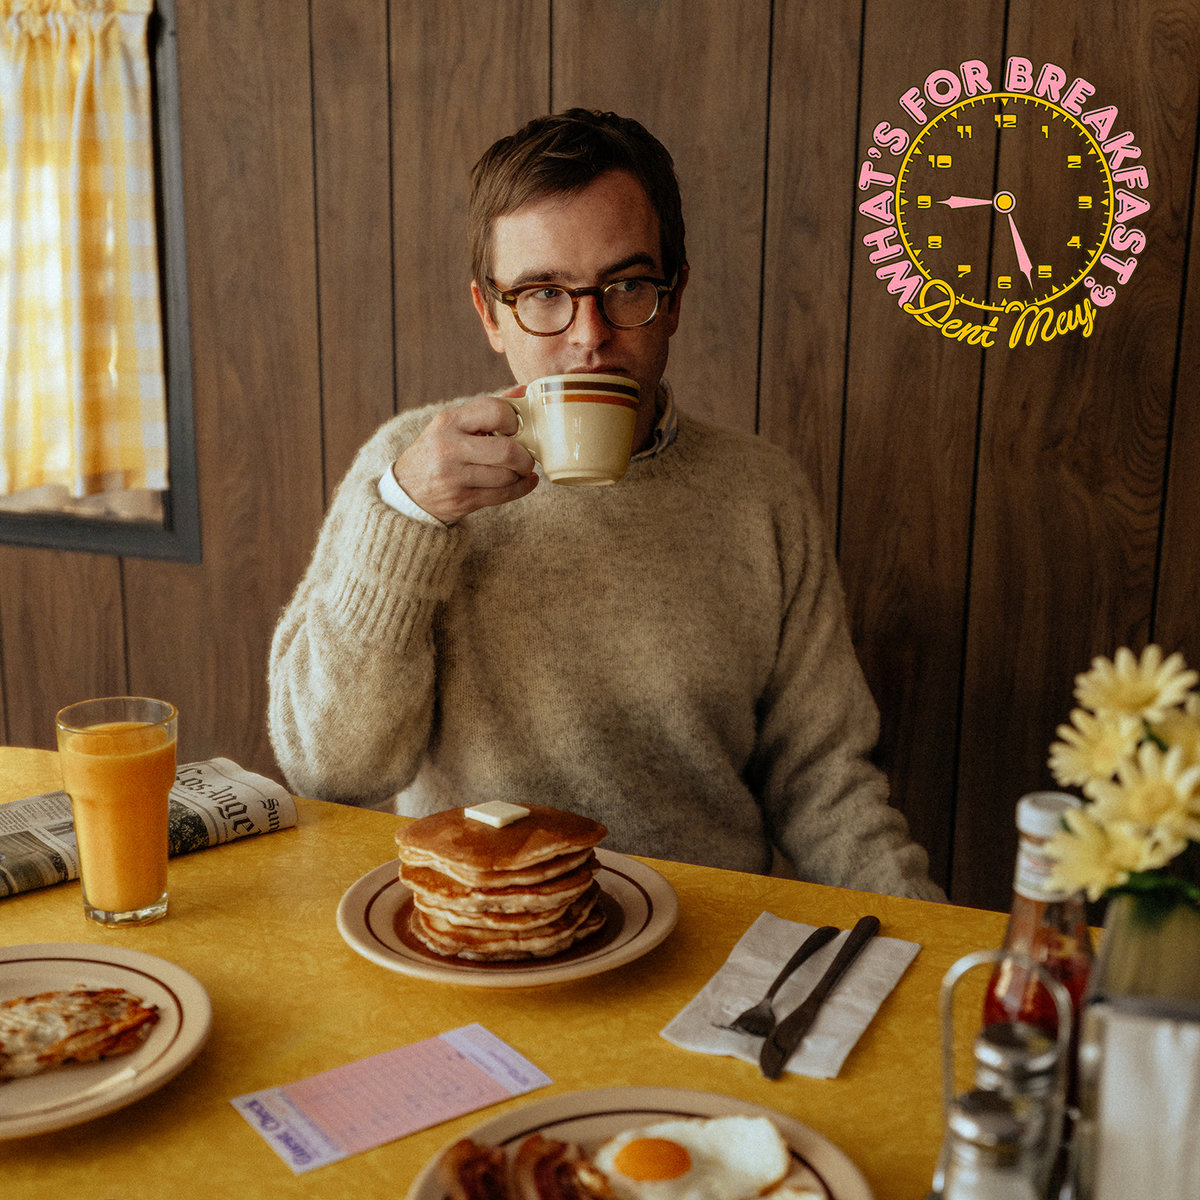 Dent May dishes up his 12 favorite food songs, inspired by his great new album 'What's for Breakfast?' brooklynvegan.com/dent-may-dishe…